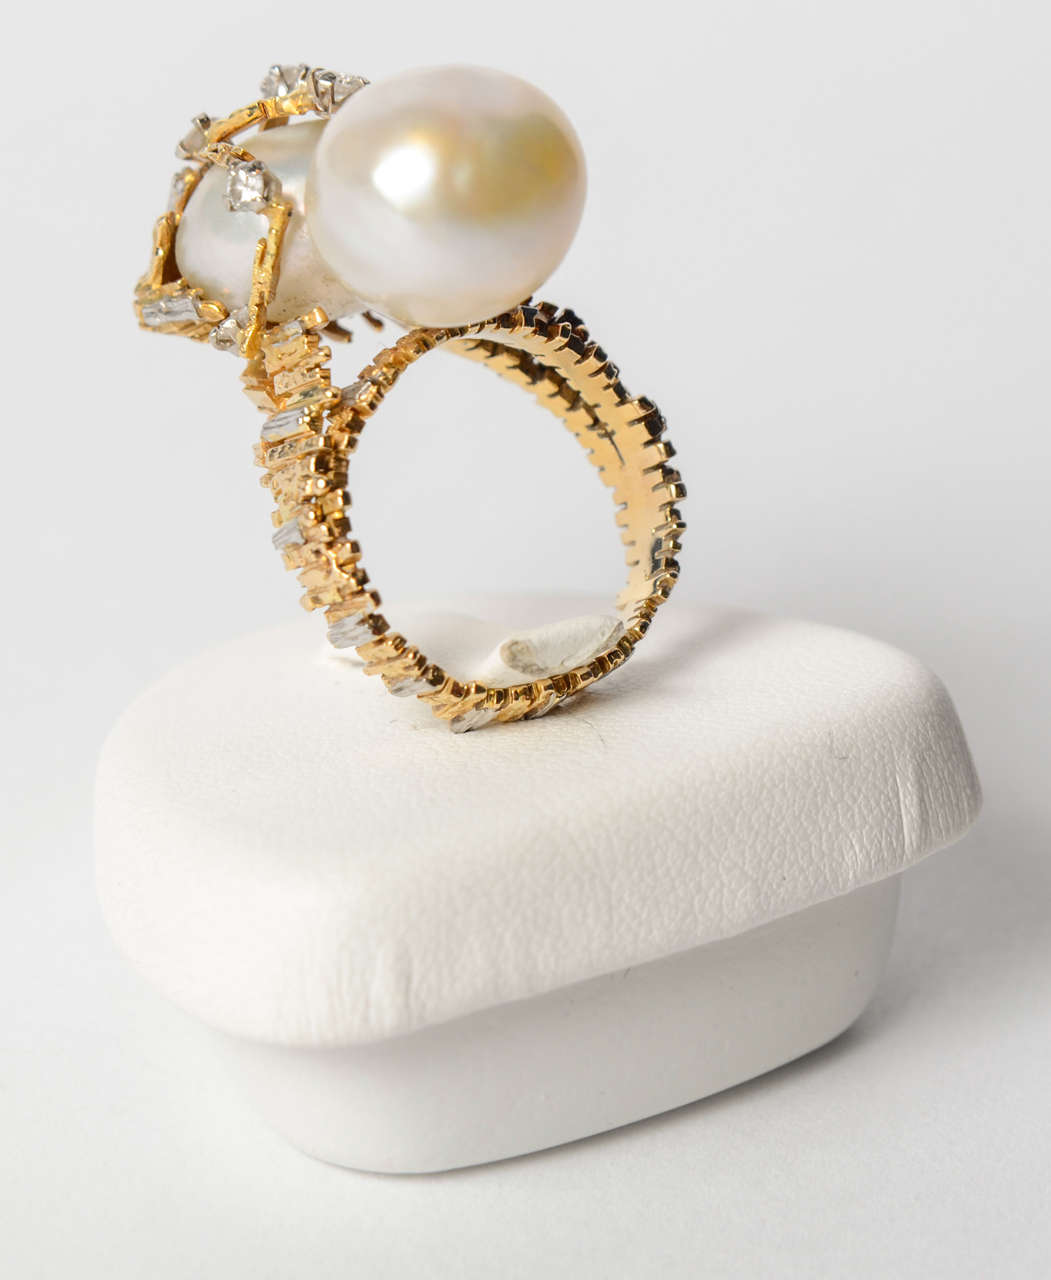 Yellow and white gold ring with diamonds and big cultured pearl, circa 1970.